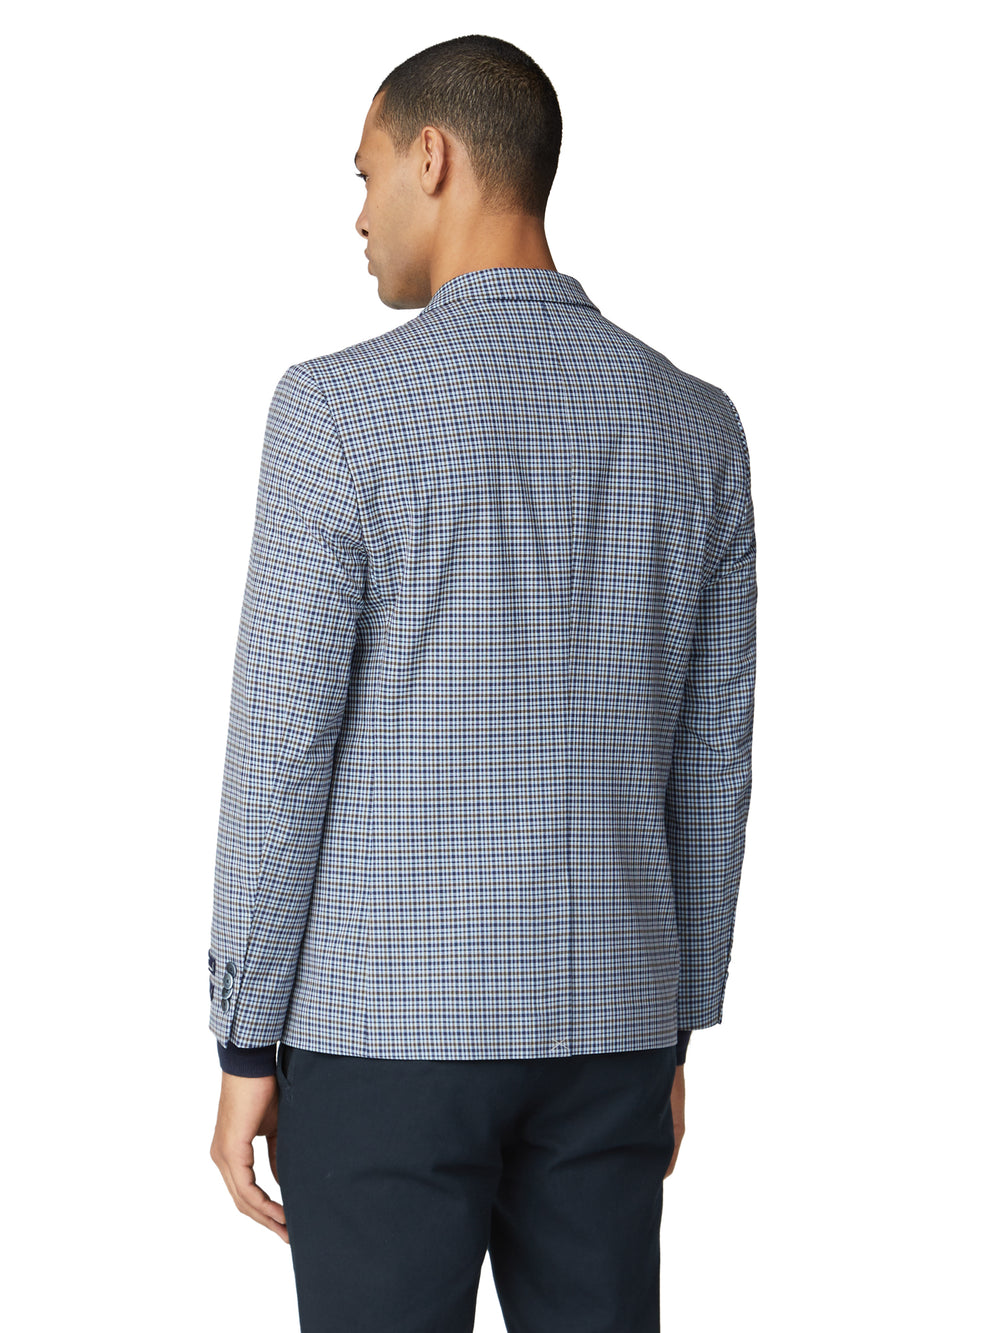 Crown Check Sportcoat Jacket - Navy